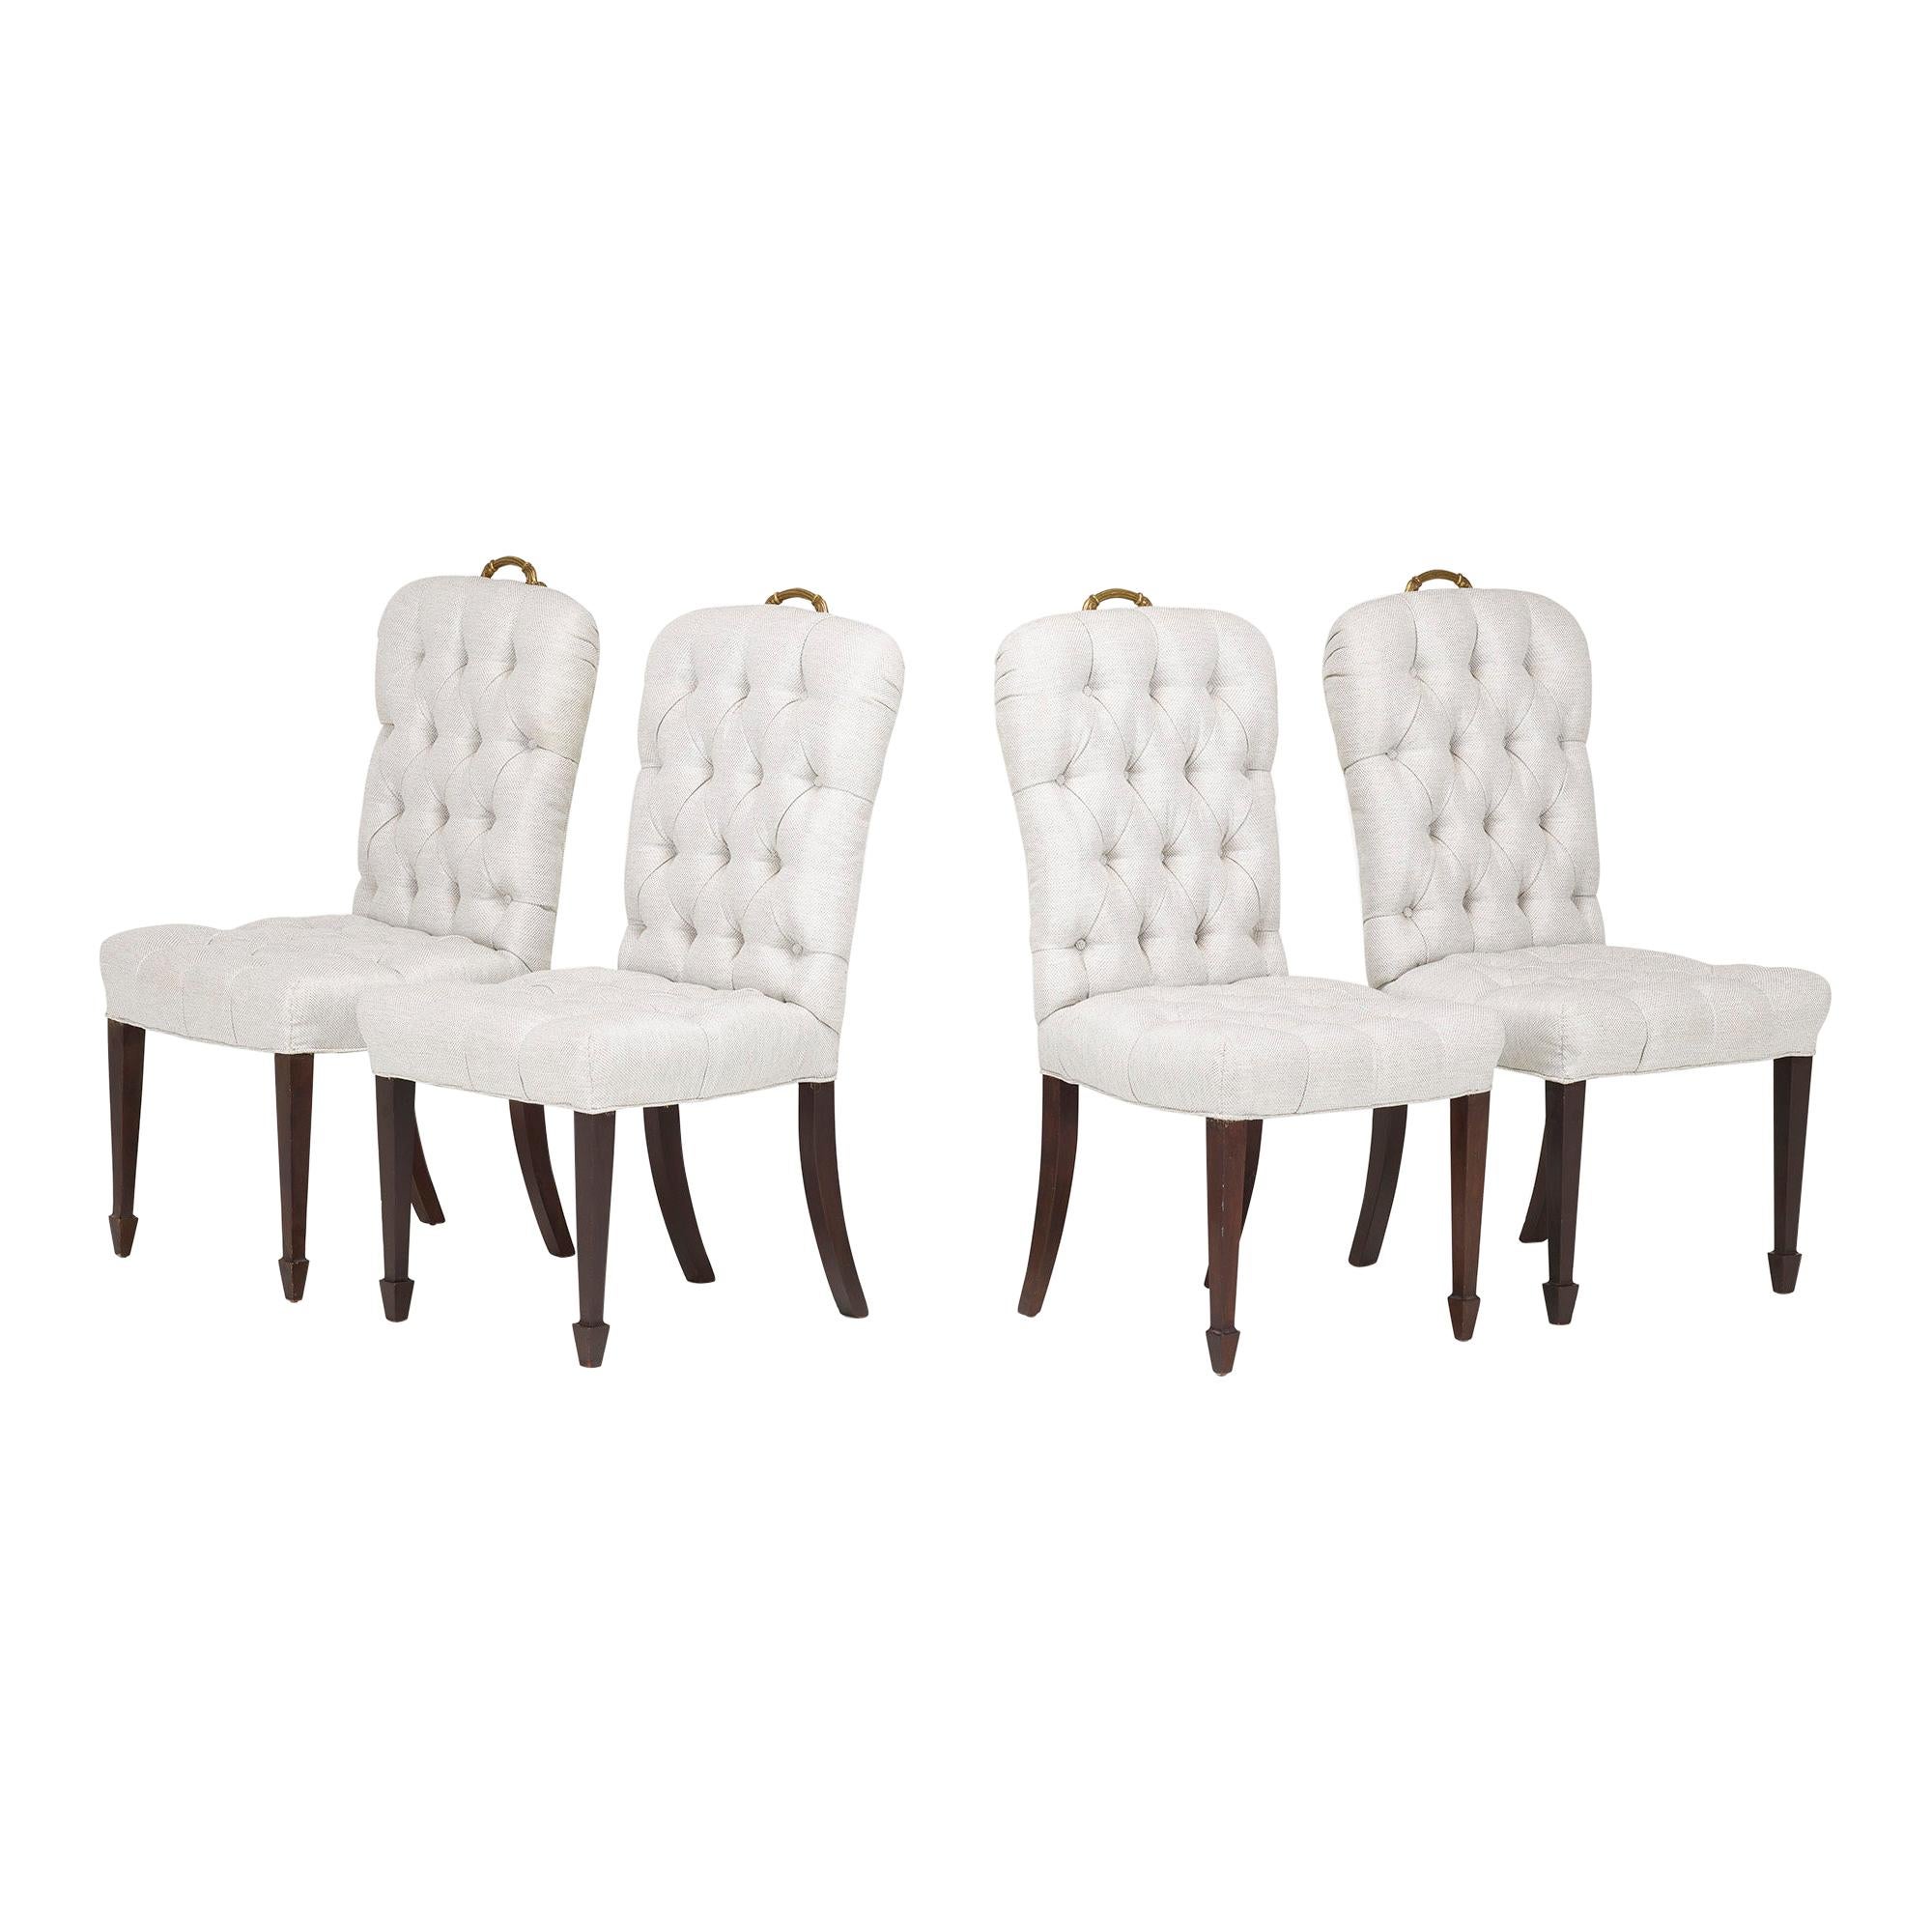 Set of Four George III Style Dining Chairs